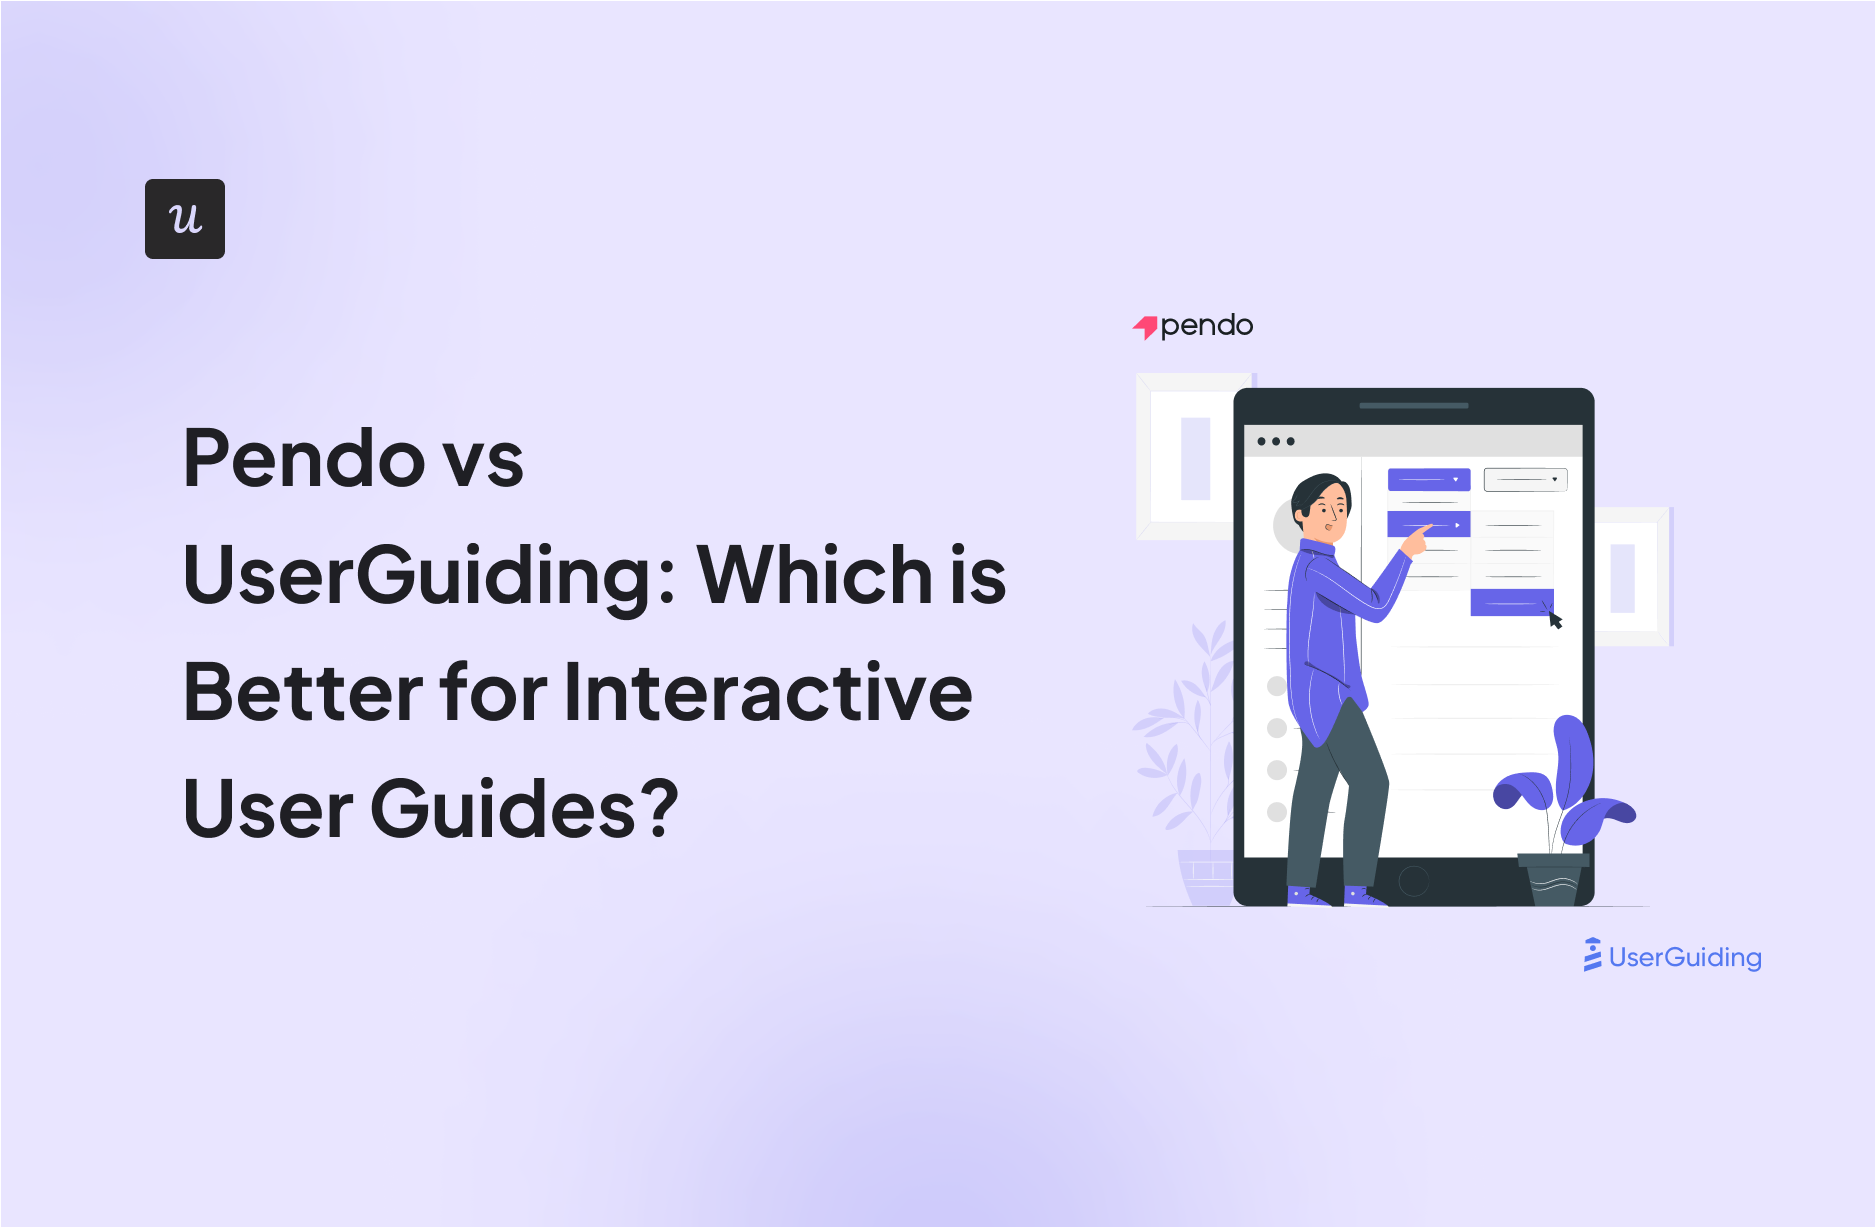 Pendo vs UserGuiding: Which is Better for Interactive User Guides?